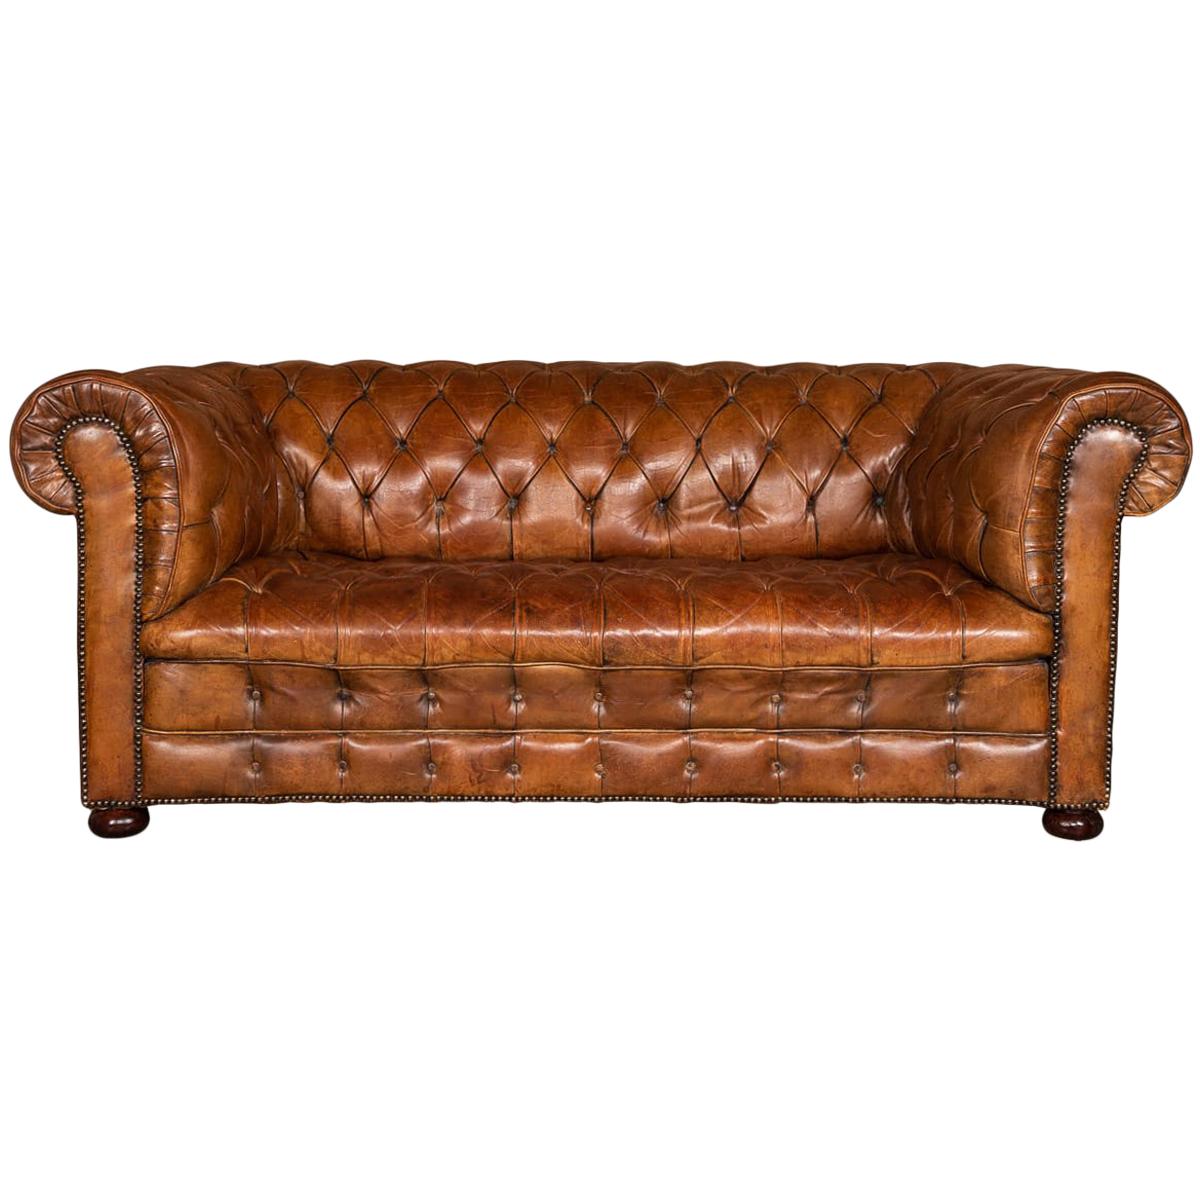 20th Century Chesterfield Three-Seat Leather Sofa with Button Down Seats